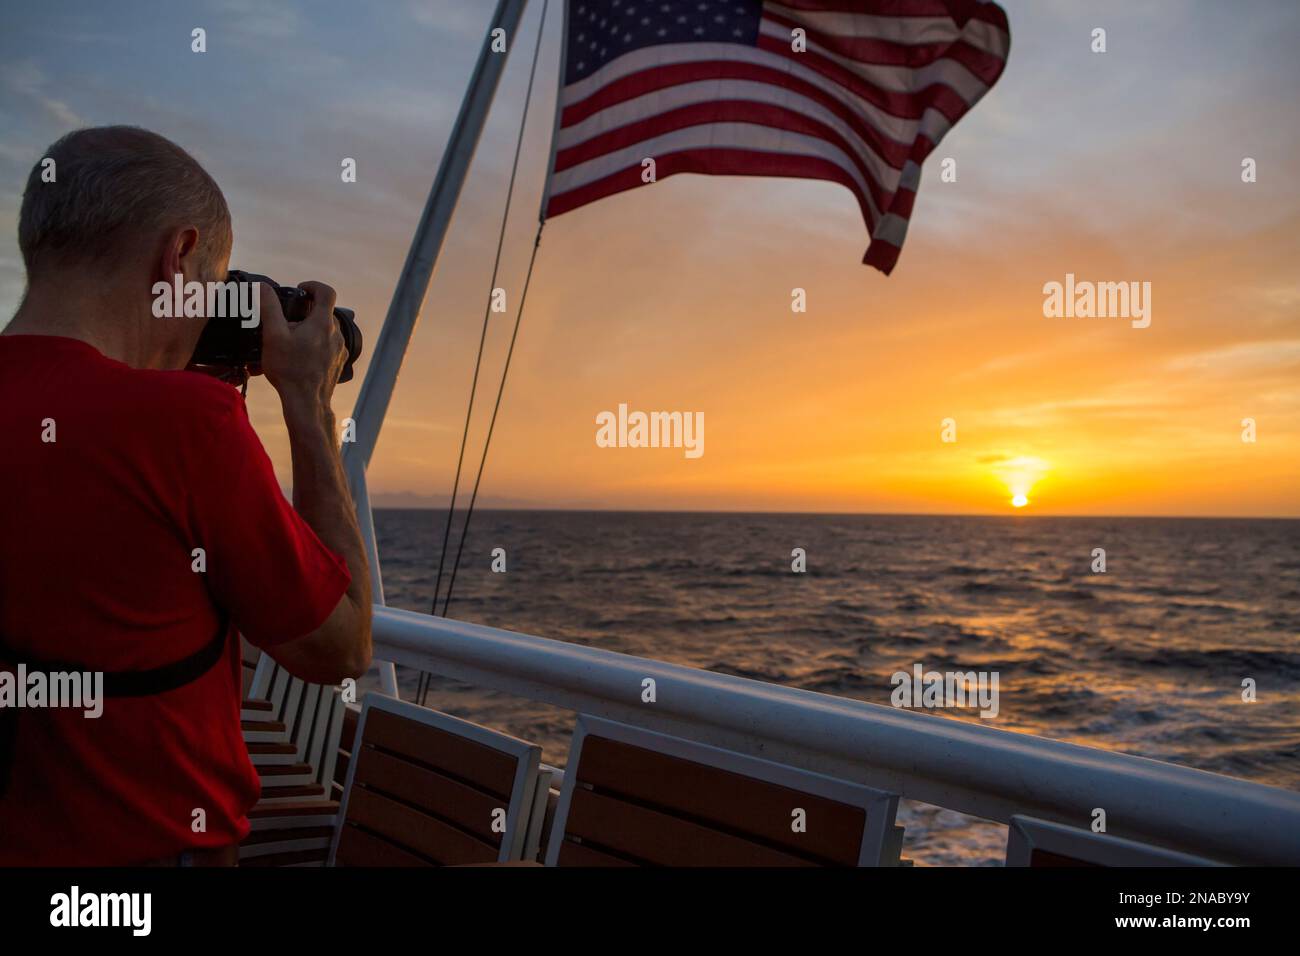 Amidst a colorful morning sky near Panama, a passenger aboard an expedition ship photographs the sunrise as an American flag billows in the wind Stock Photo